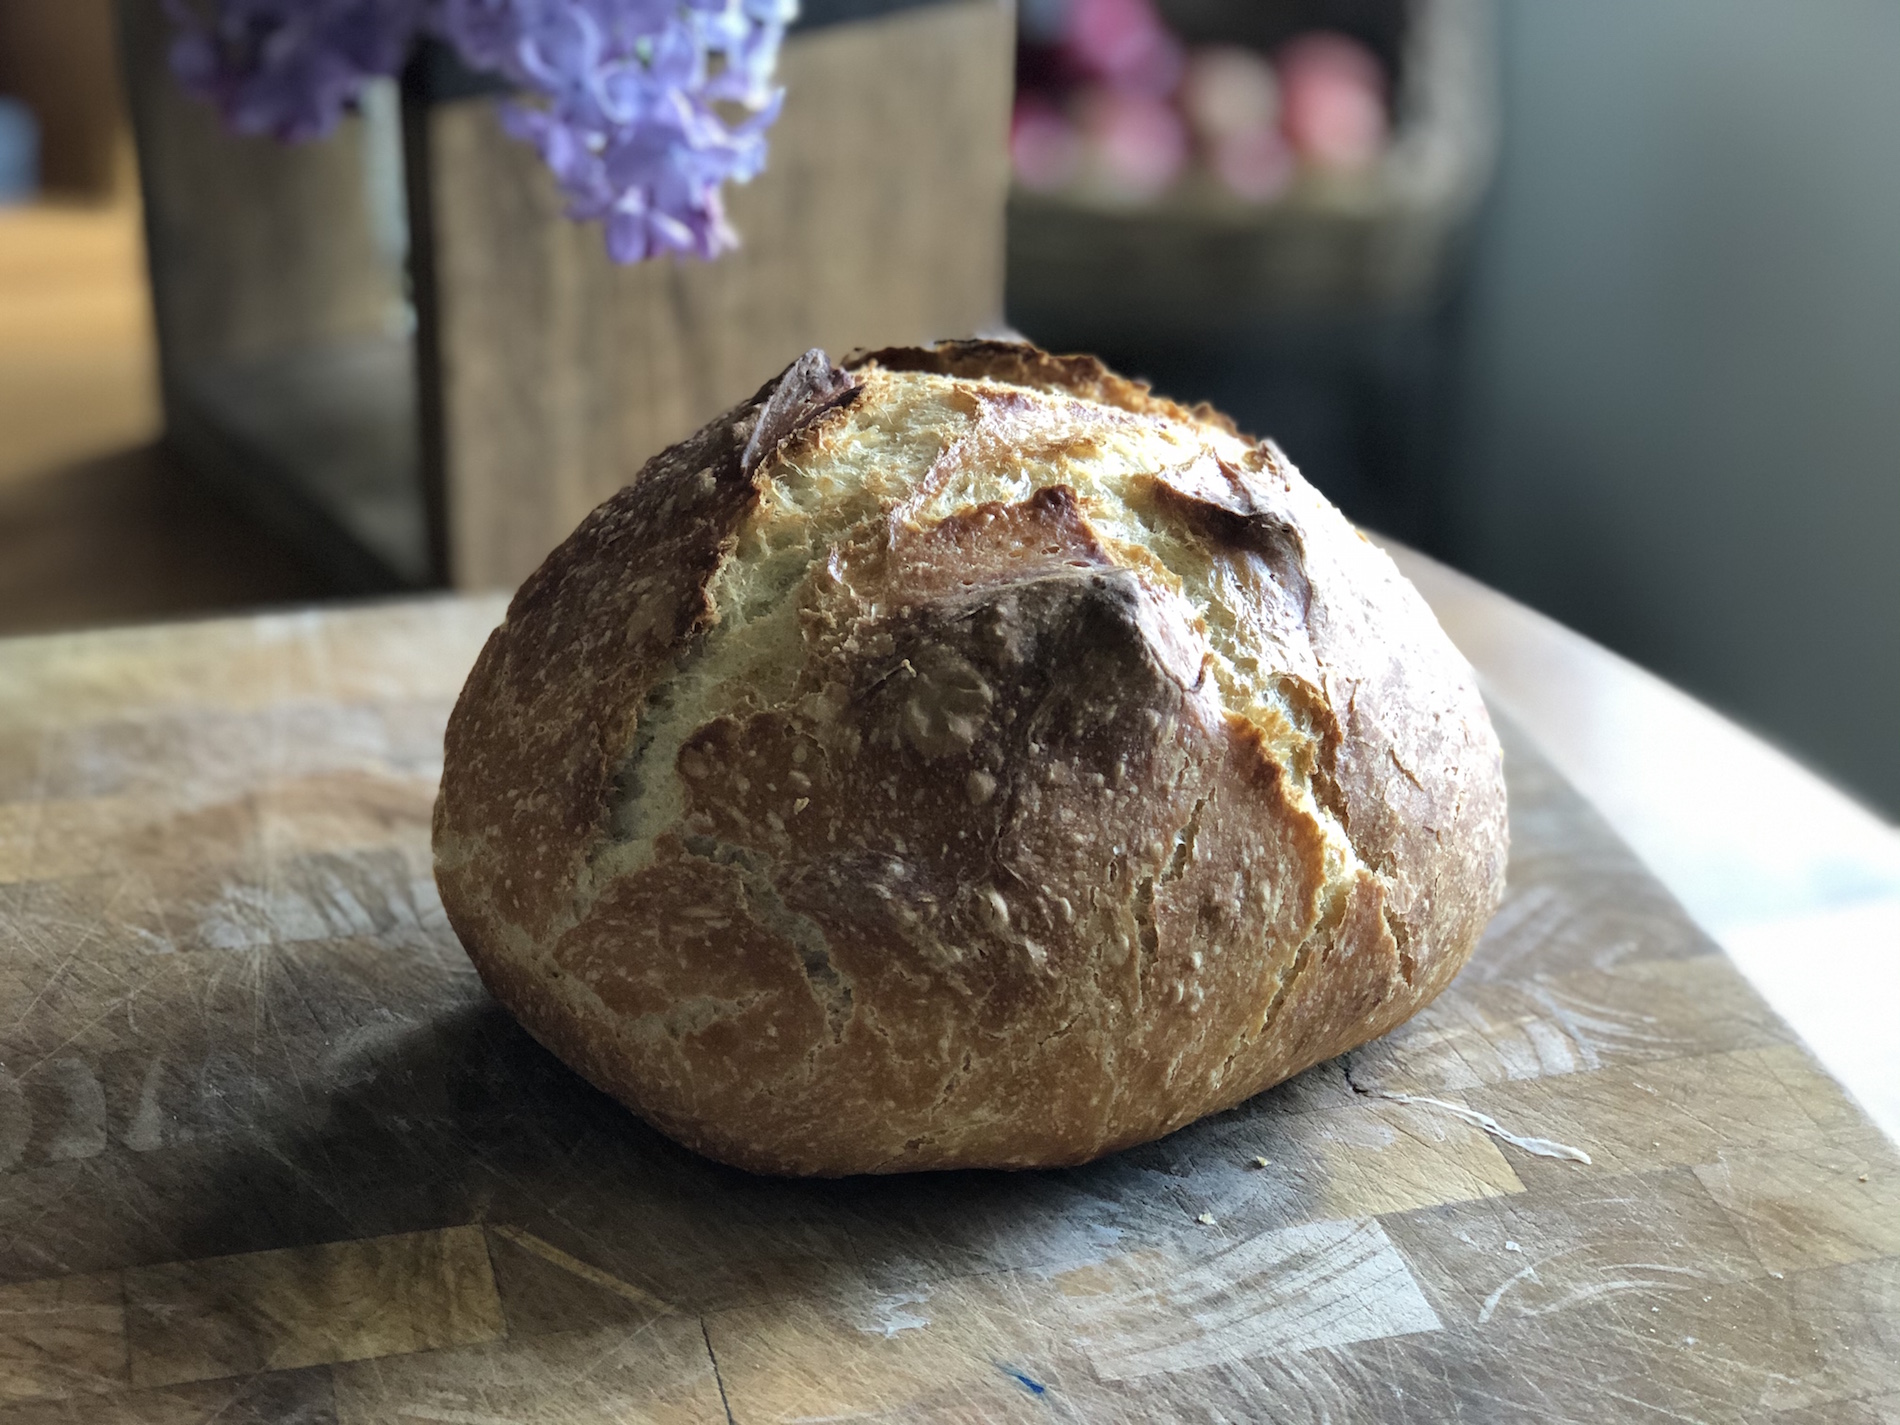 Please enter your name/email to see the bread making videos: